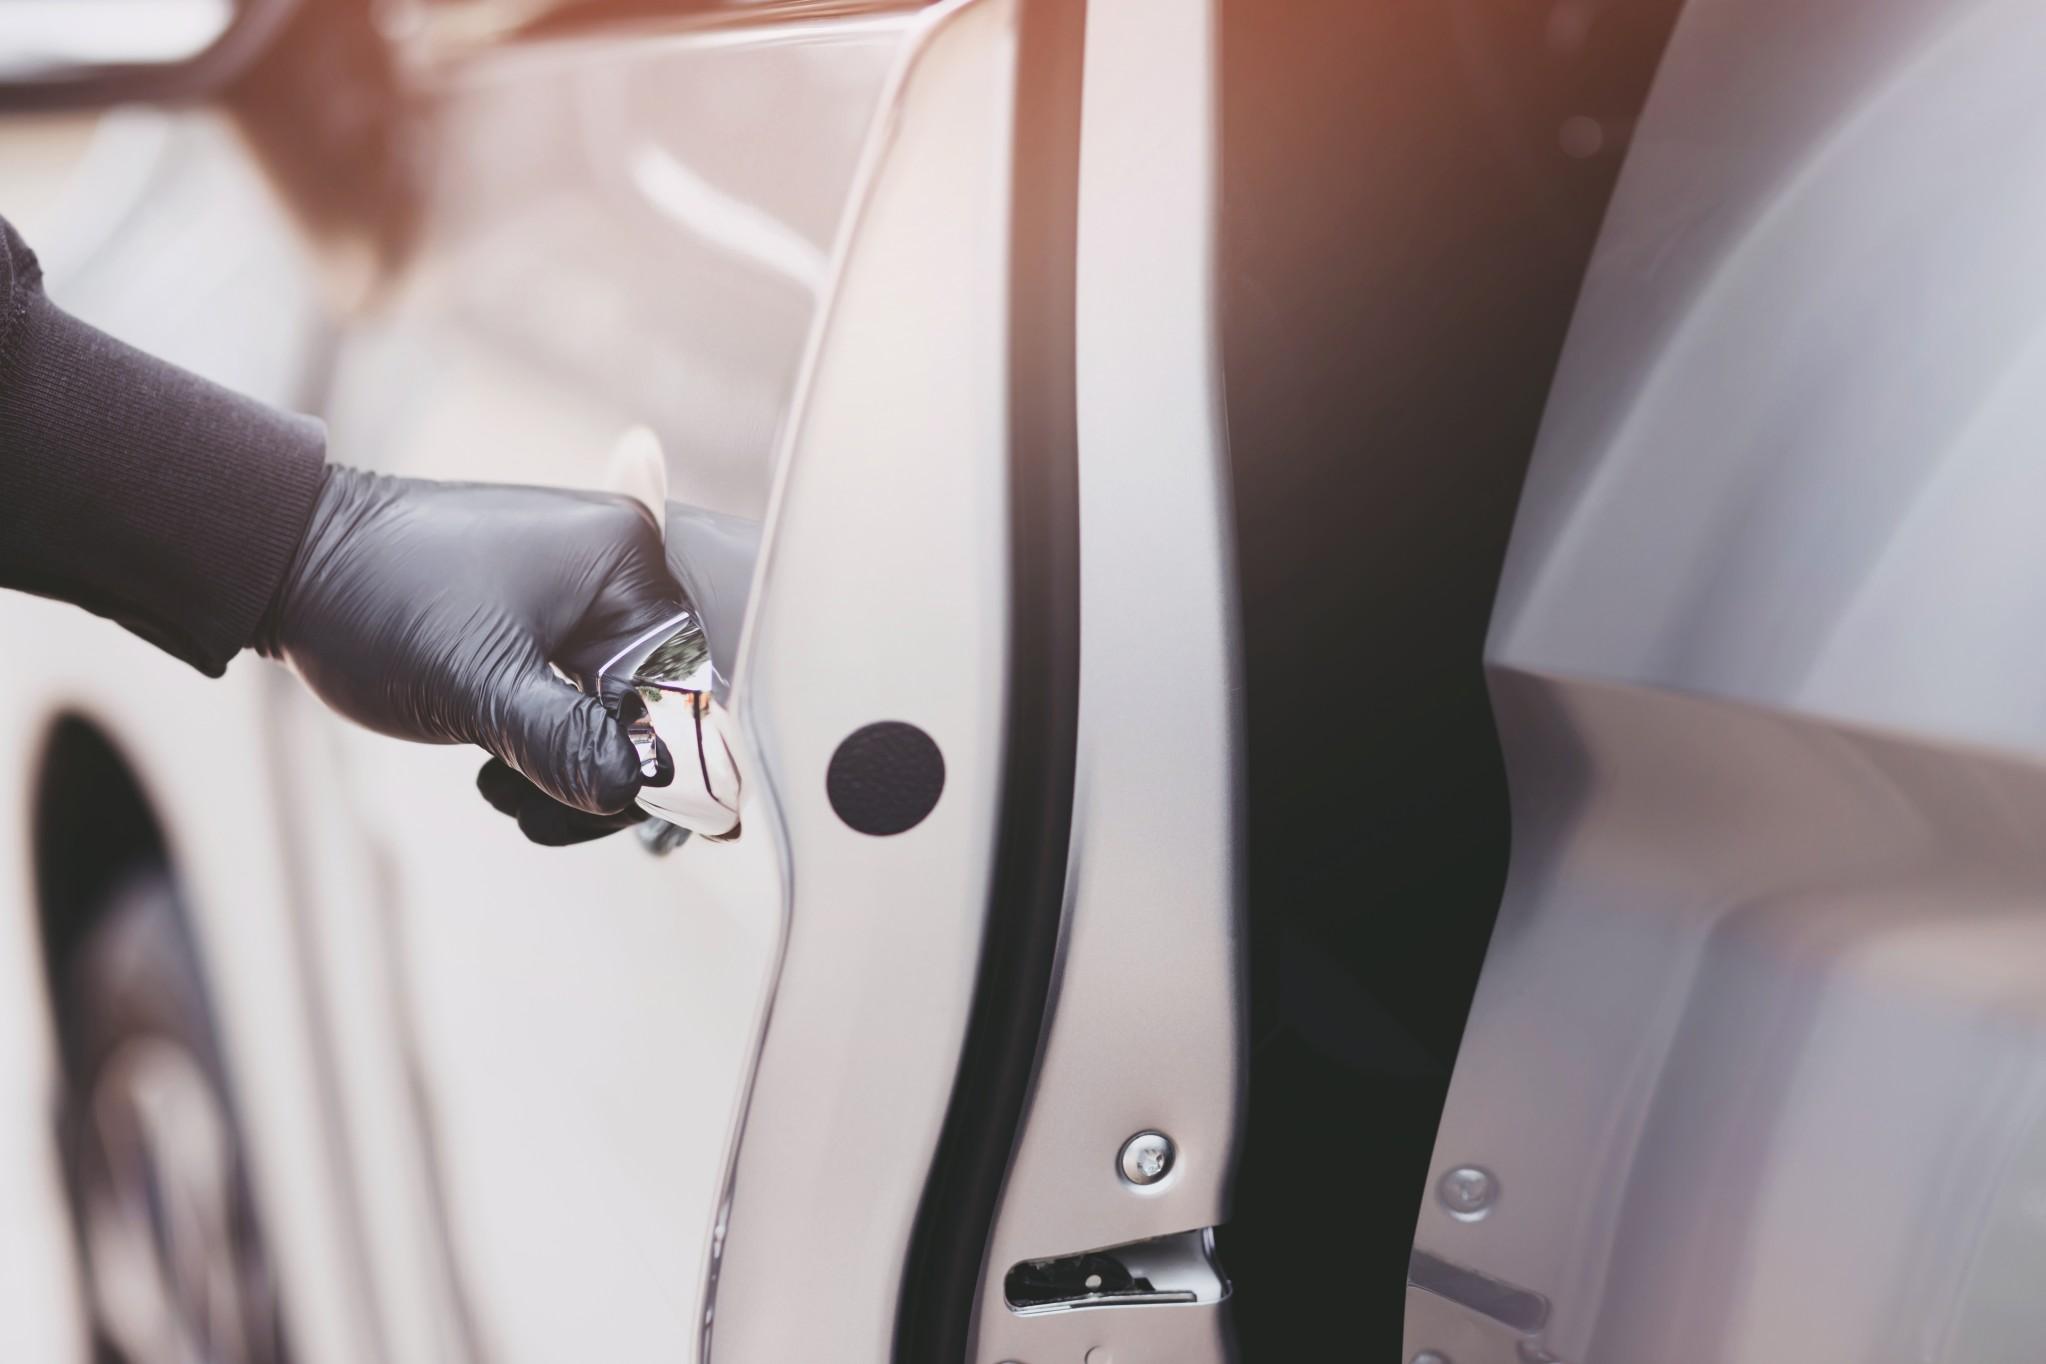 Deterring potential car thieves is the best defense against car theft.